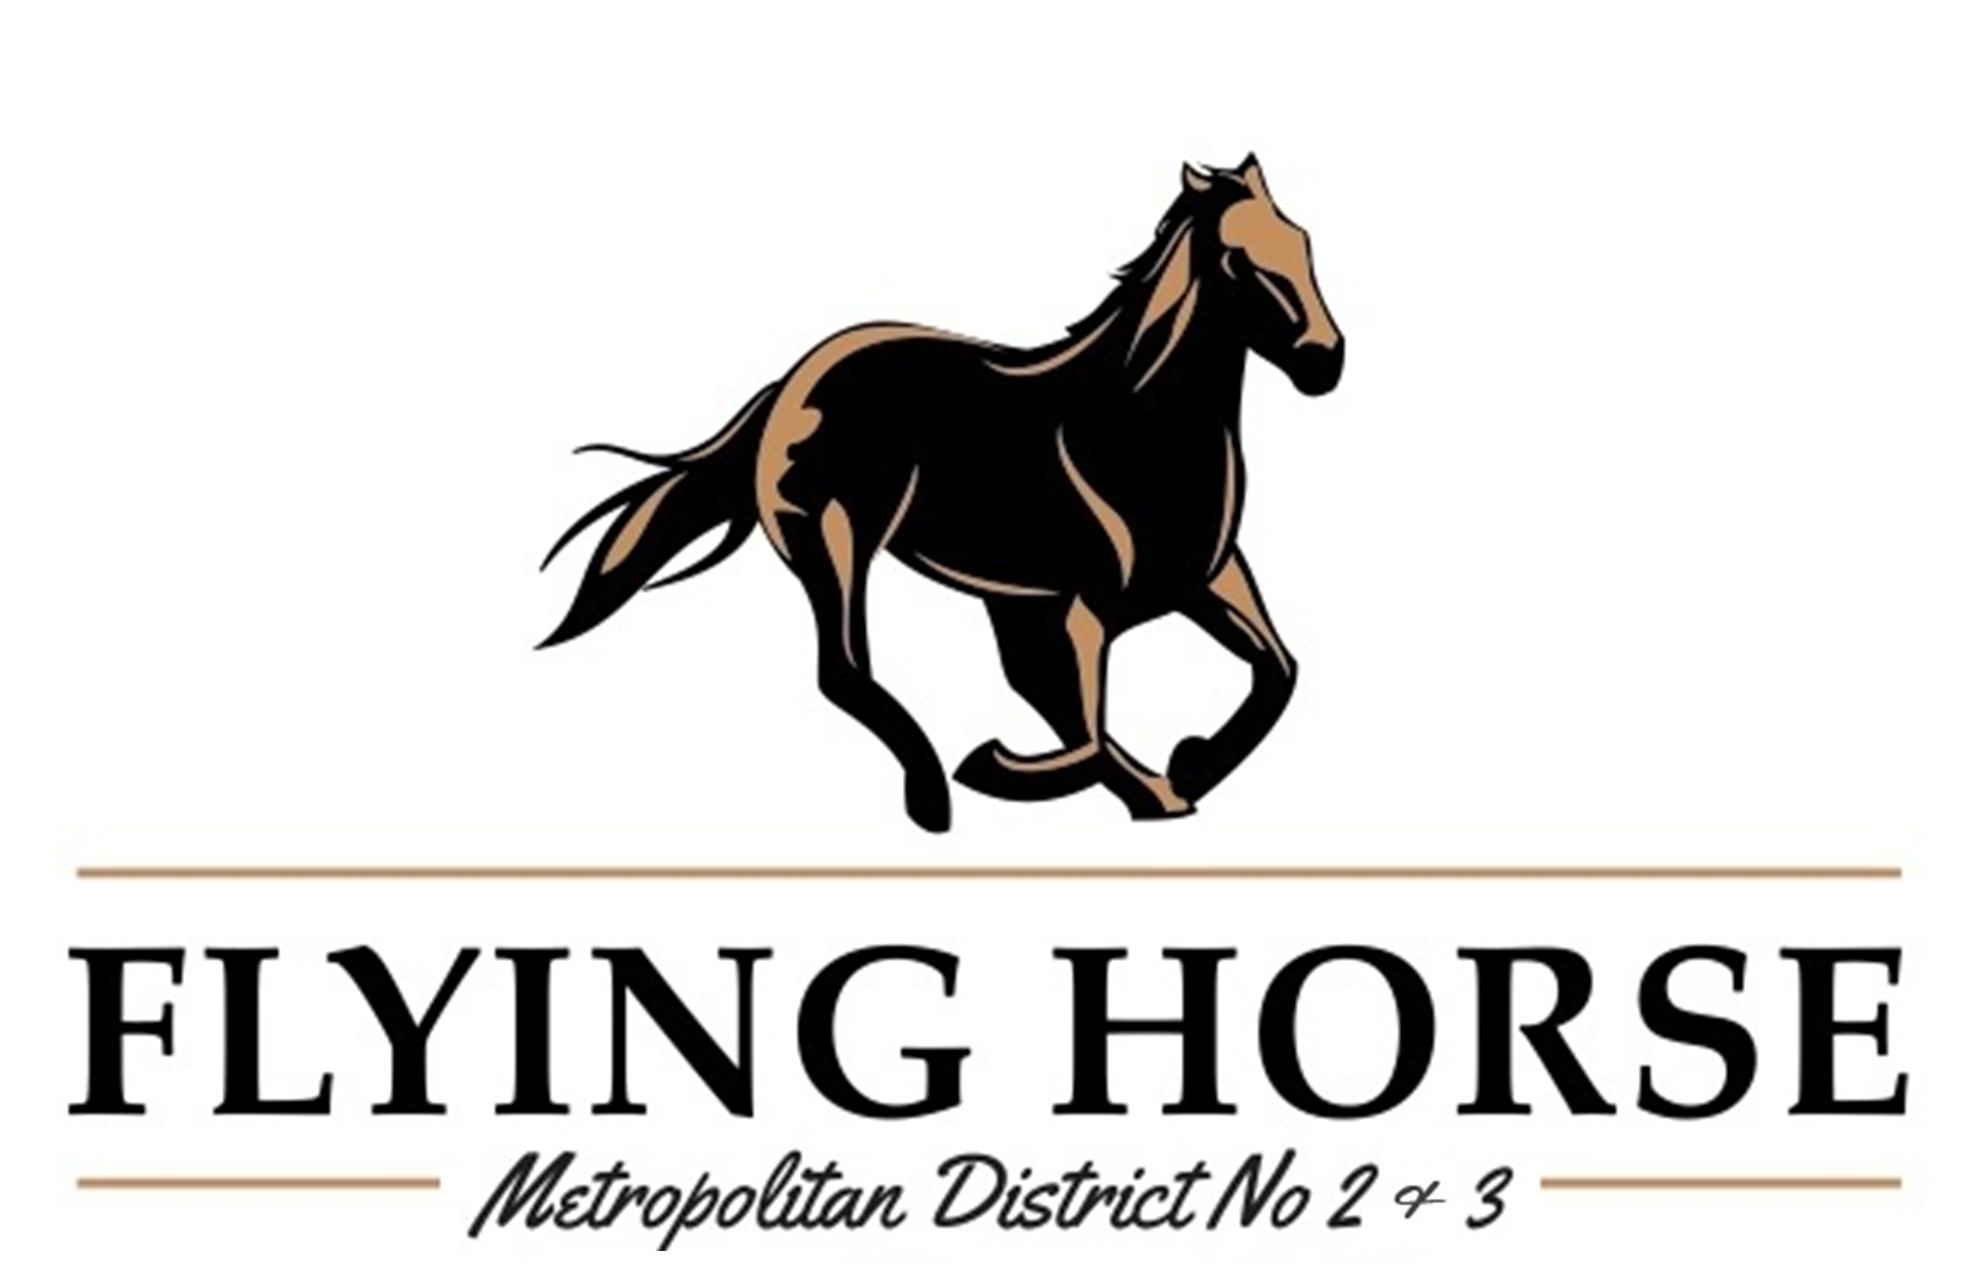 Flying Horse Metro Districts 2 and 3